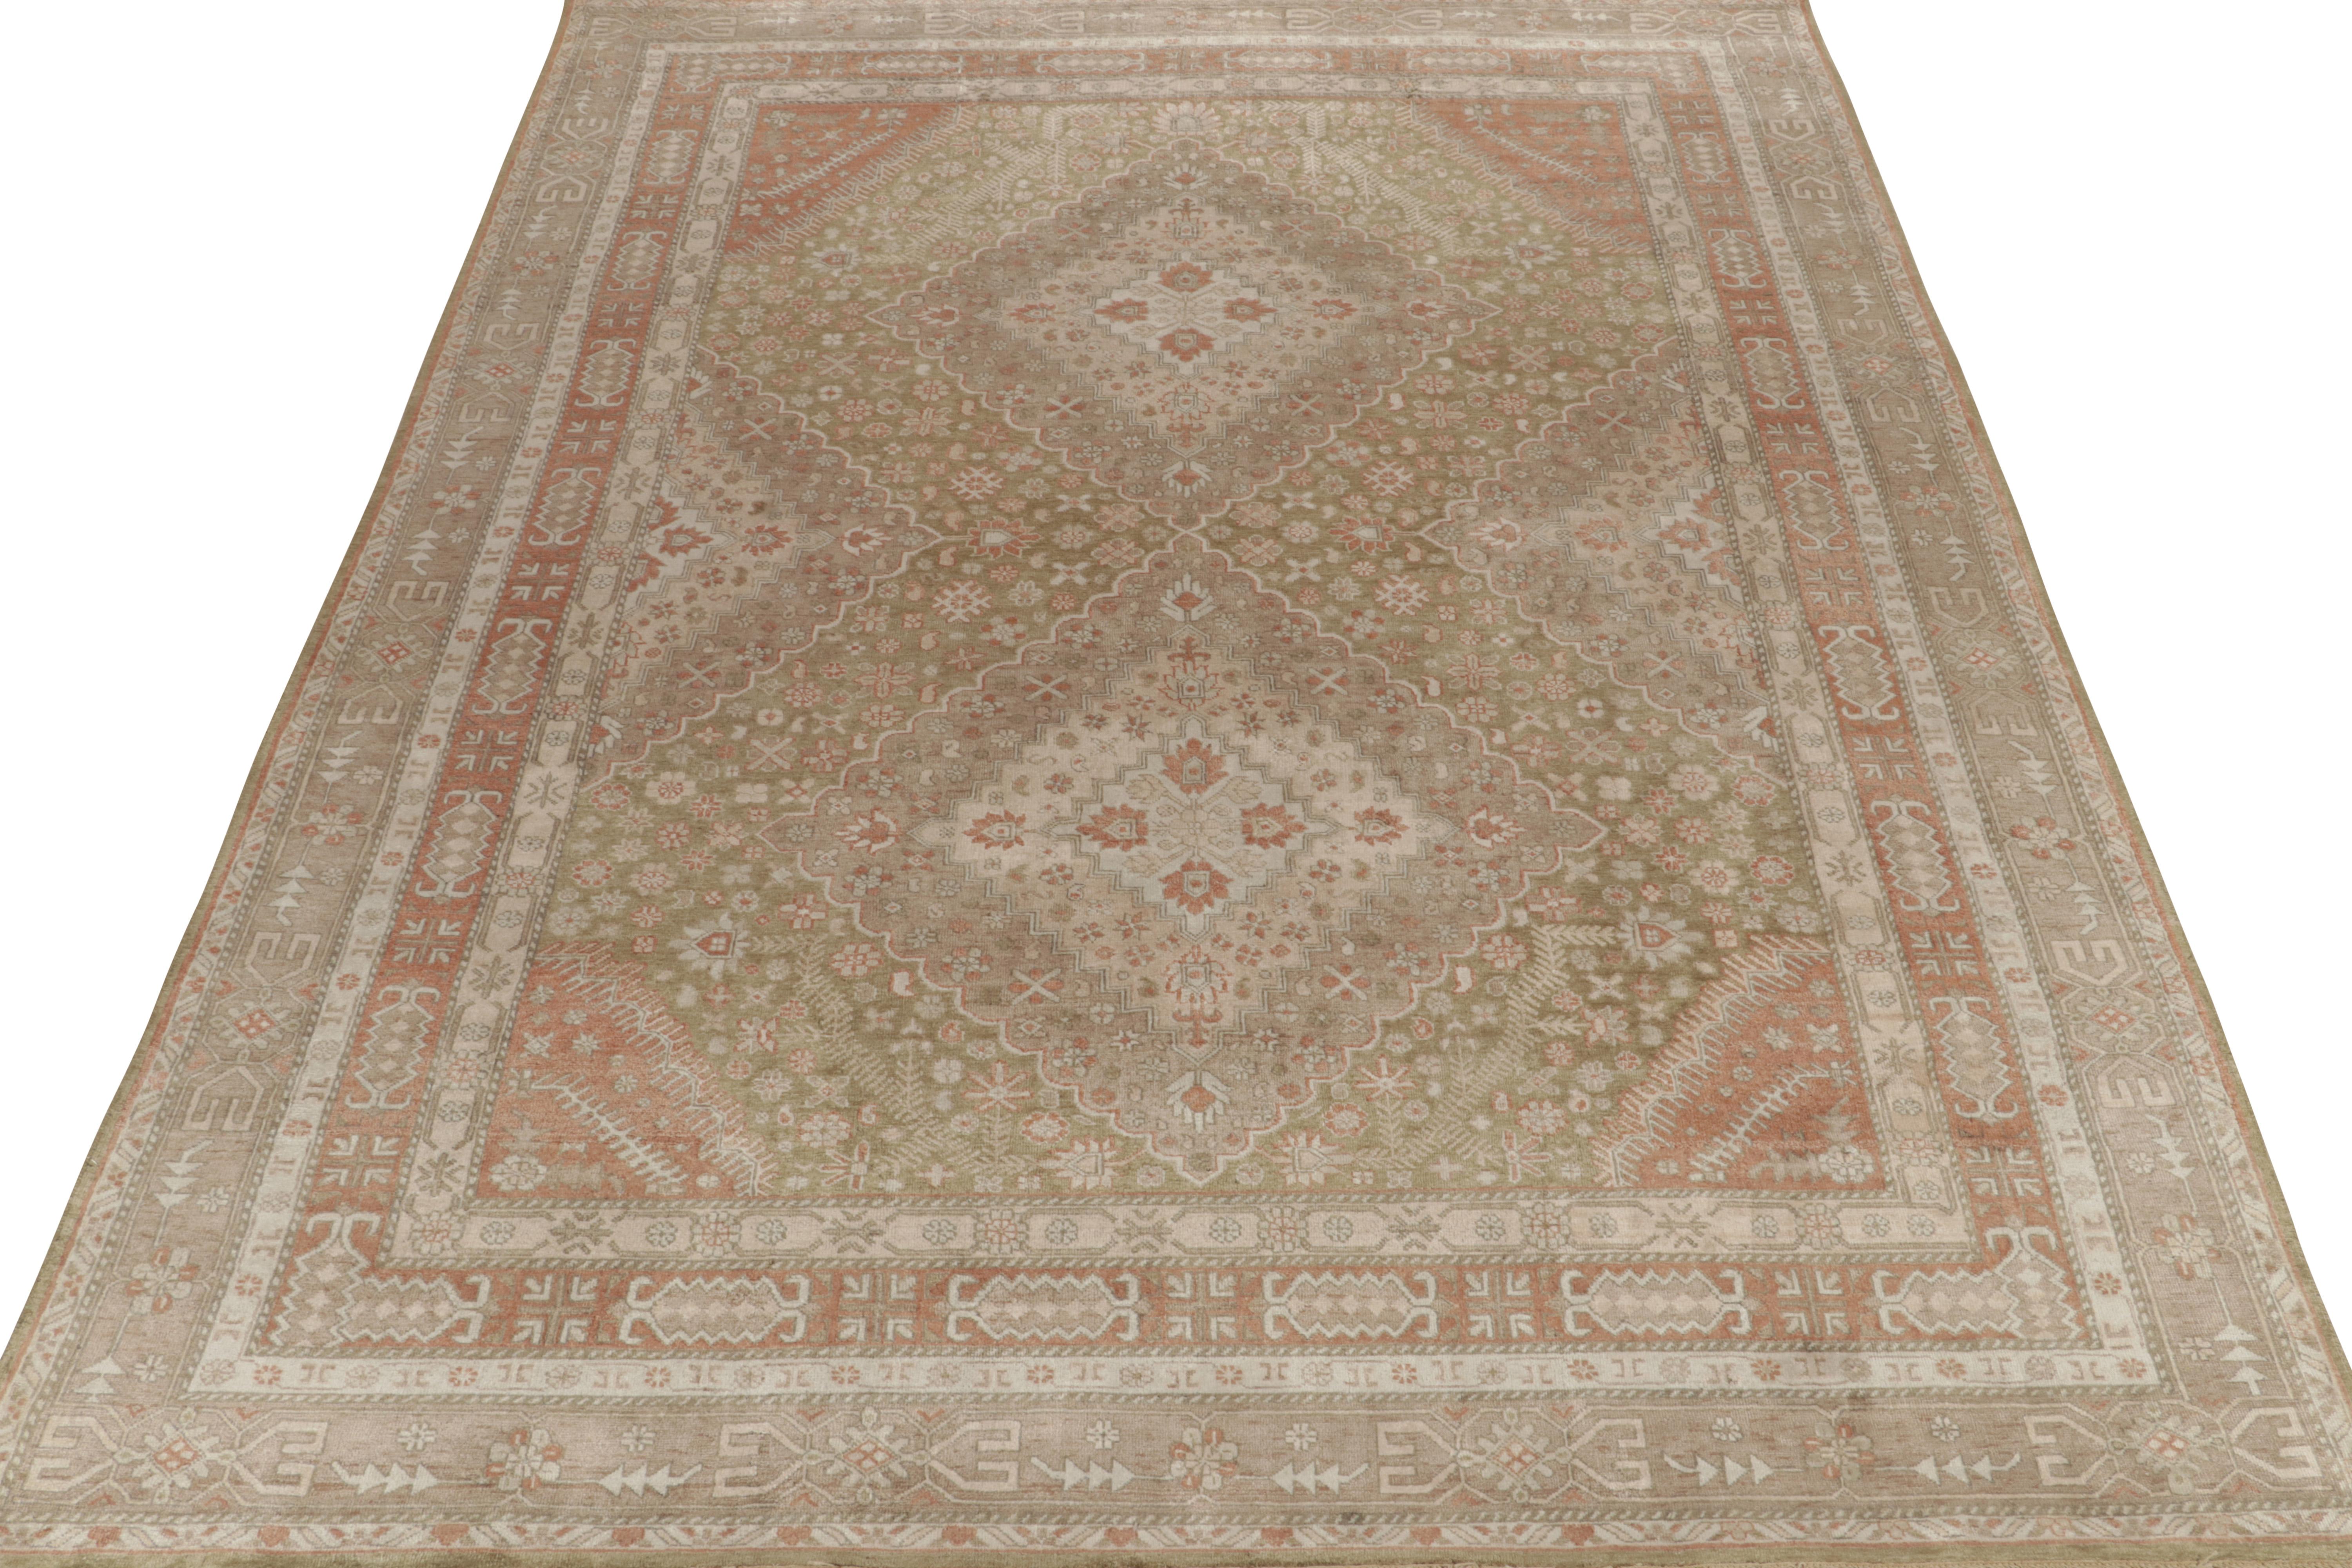 Indian Rug & Kilim’s Classic Khotan Style Rug in Beige, Rust and Ivory Floral Patterns For Sale